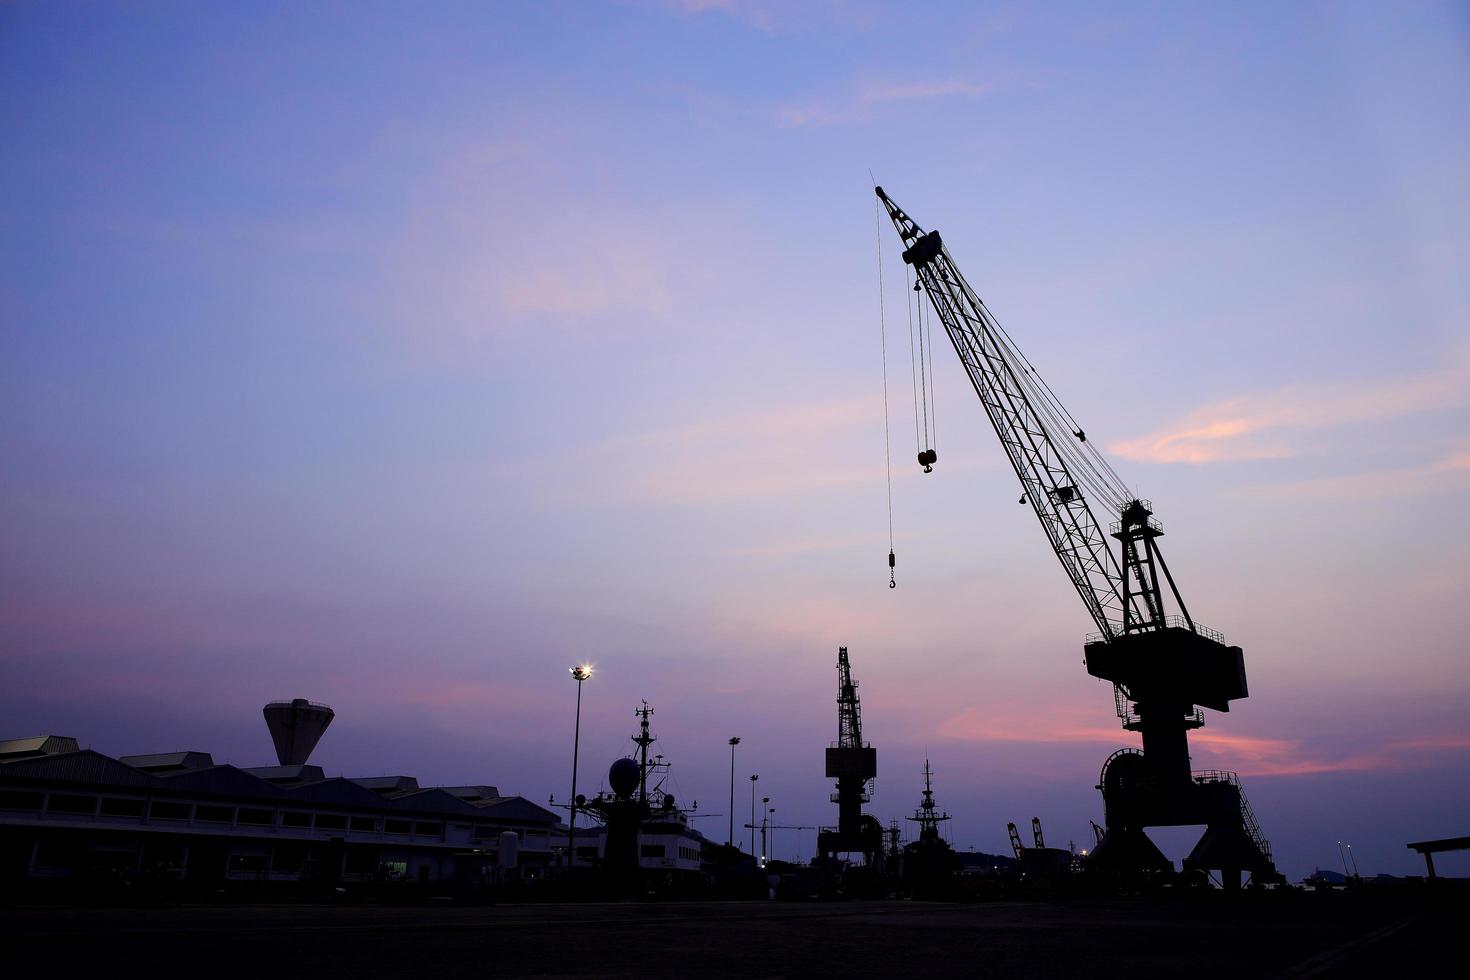 Cranes in dockside at sunset photo